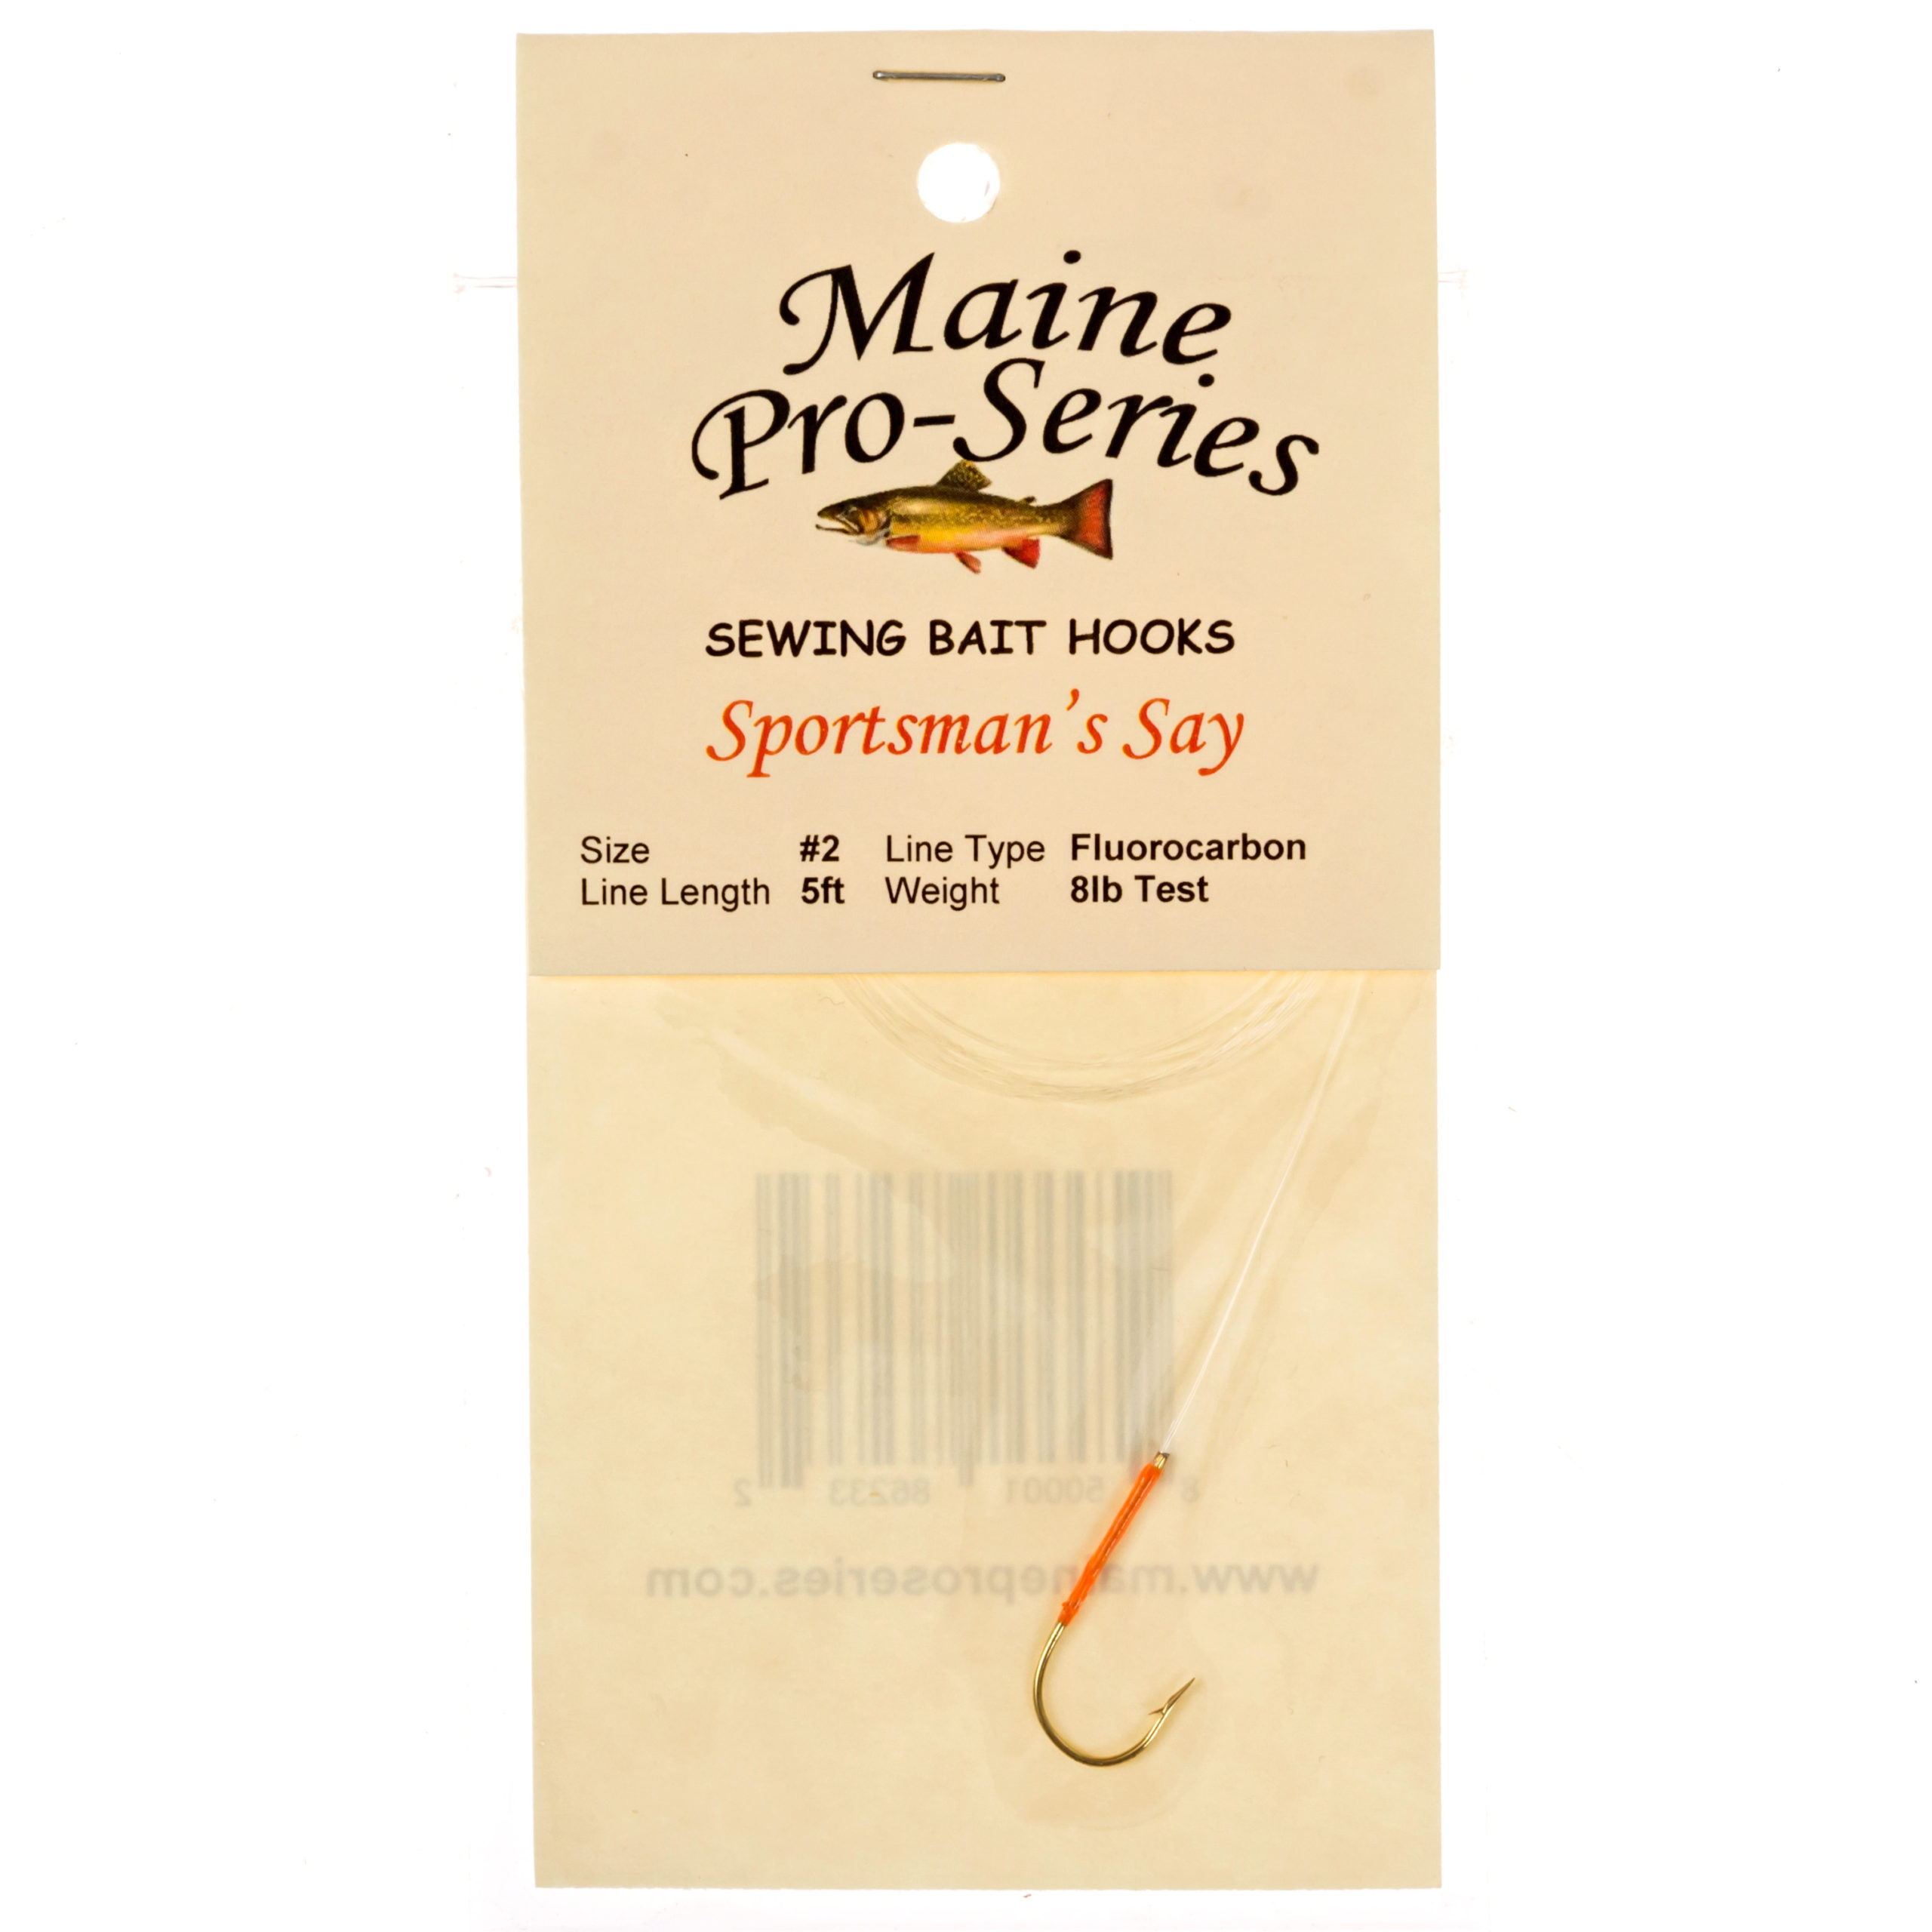 https://www.maineproseries.com/wp-content/uploads/2020/01/sewing-bait-hook-leader-package-sportsmans-say-scaled.jpg